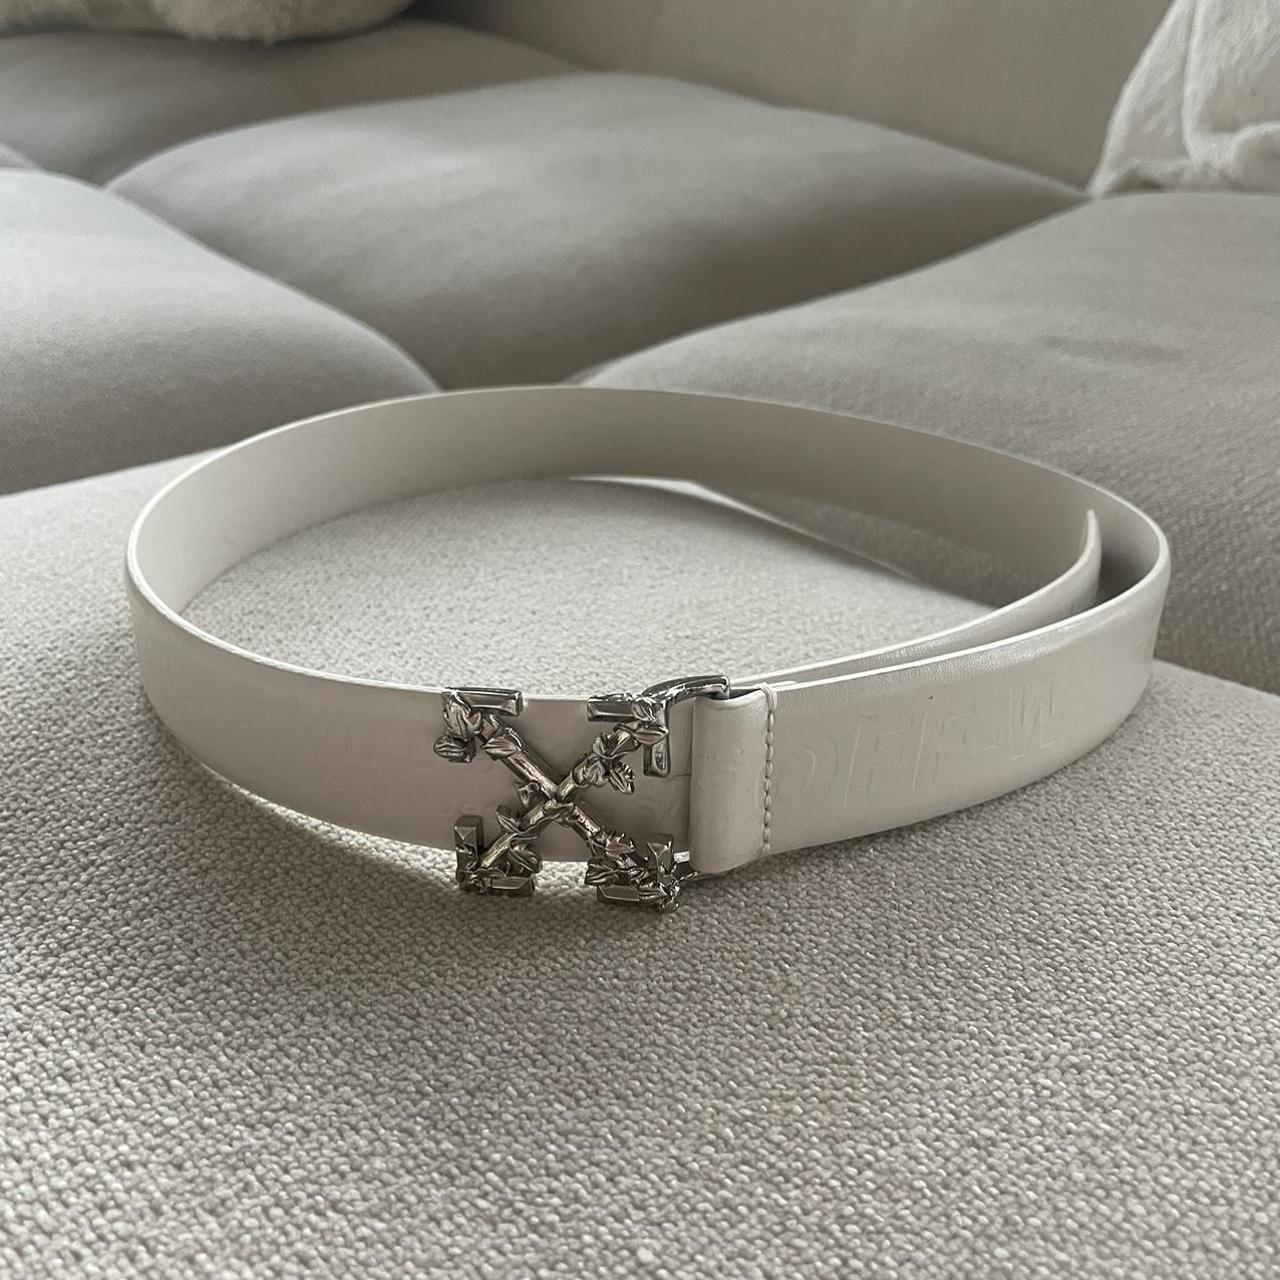 Off-White Women's White and Silver Belt